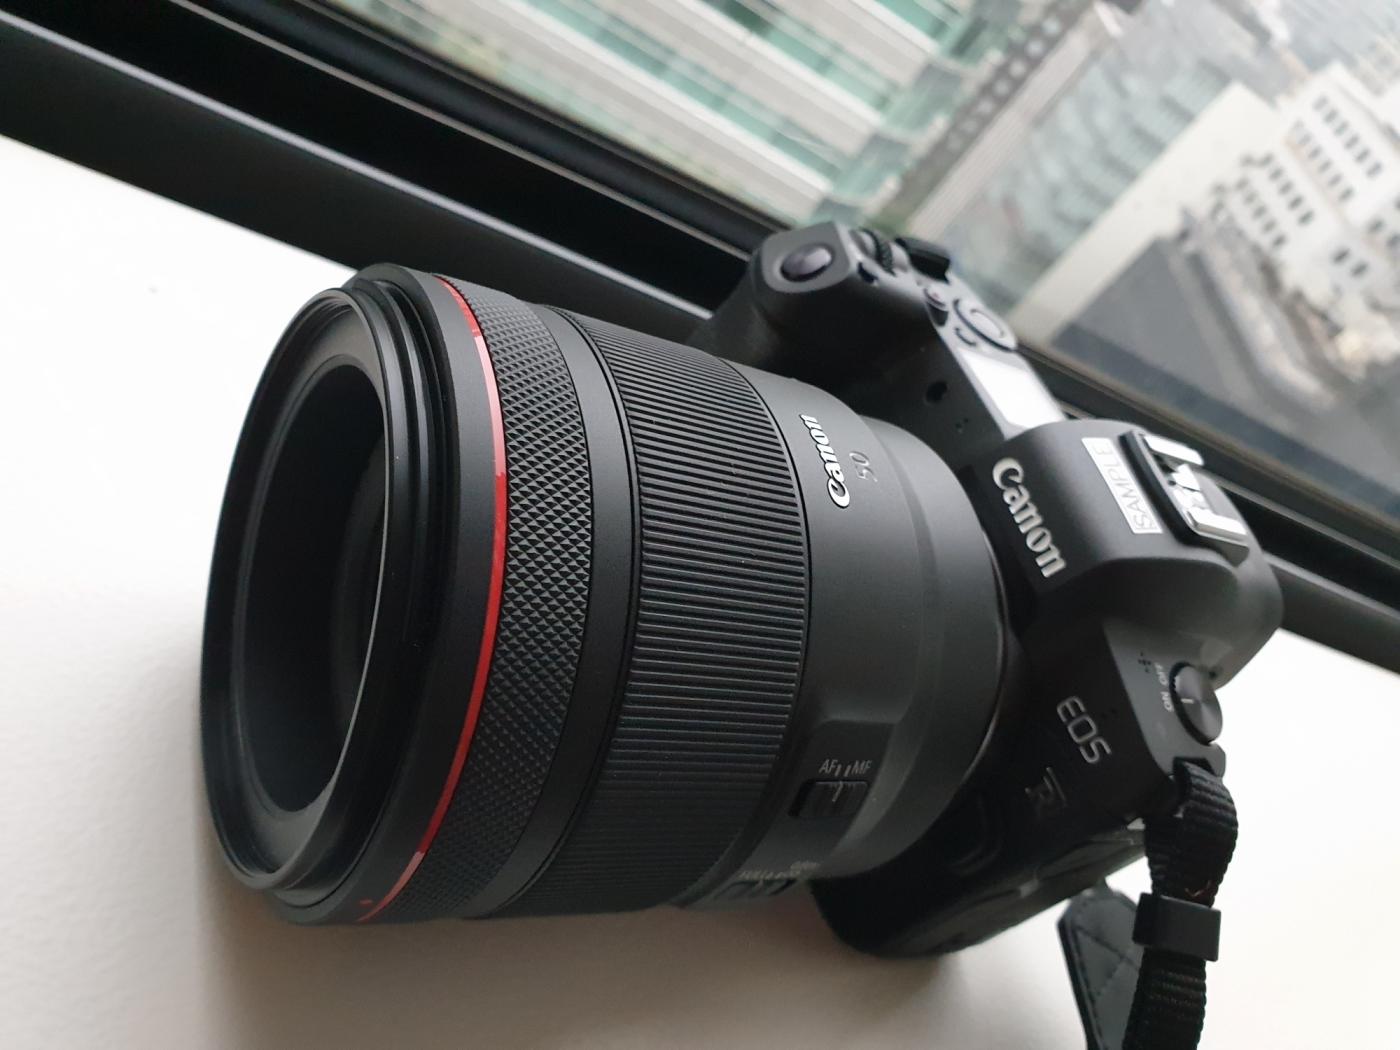 The Canon EOS R. (Photo: IANS) by .